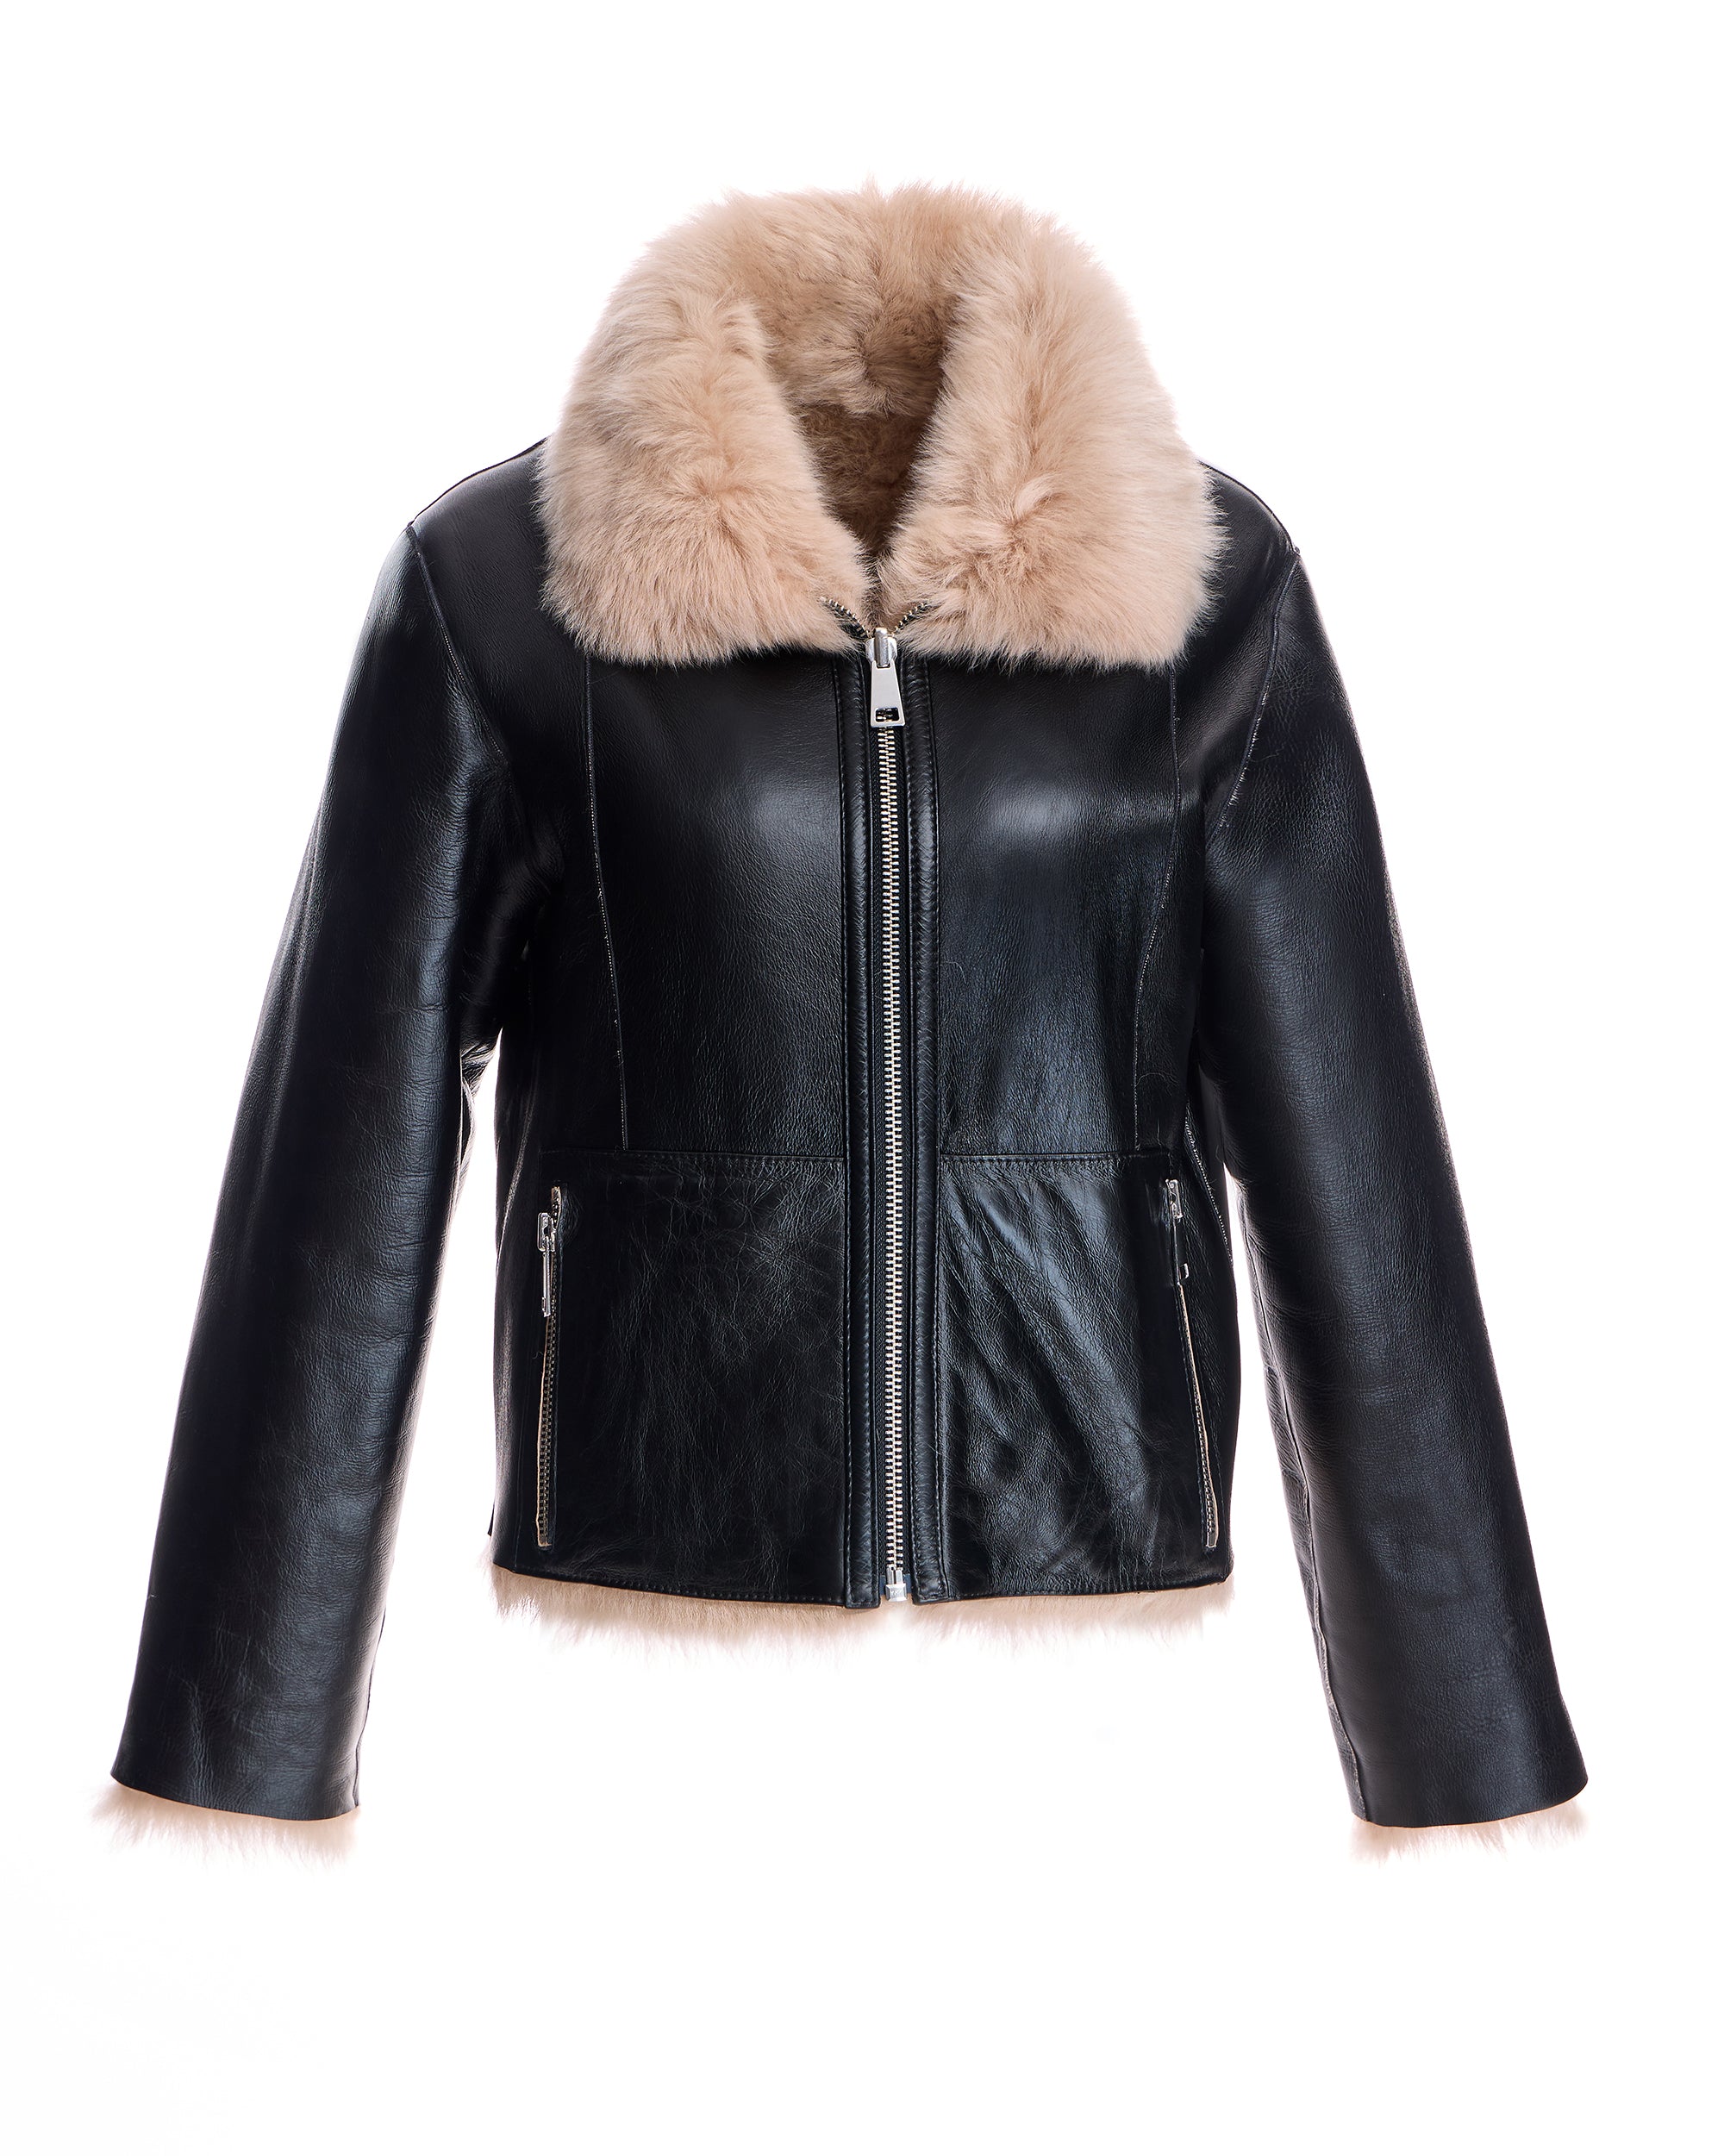 Shearling Jacket Reversible to Leather